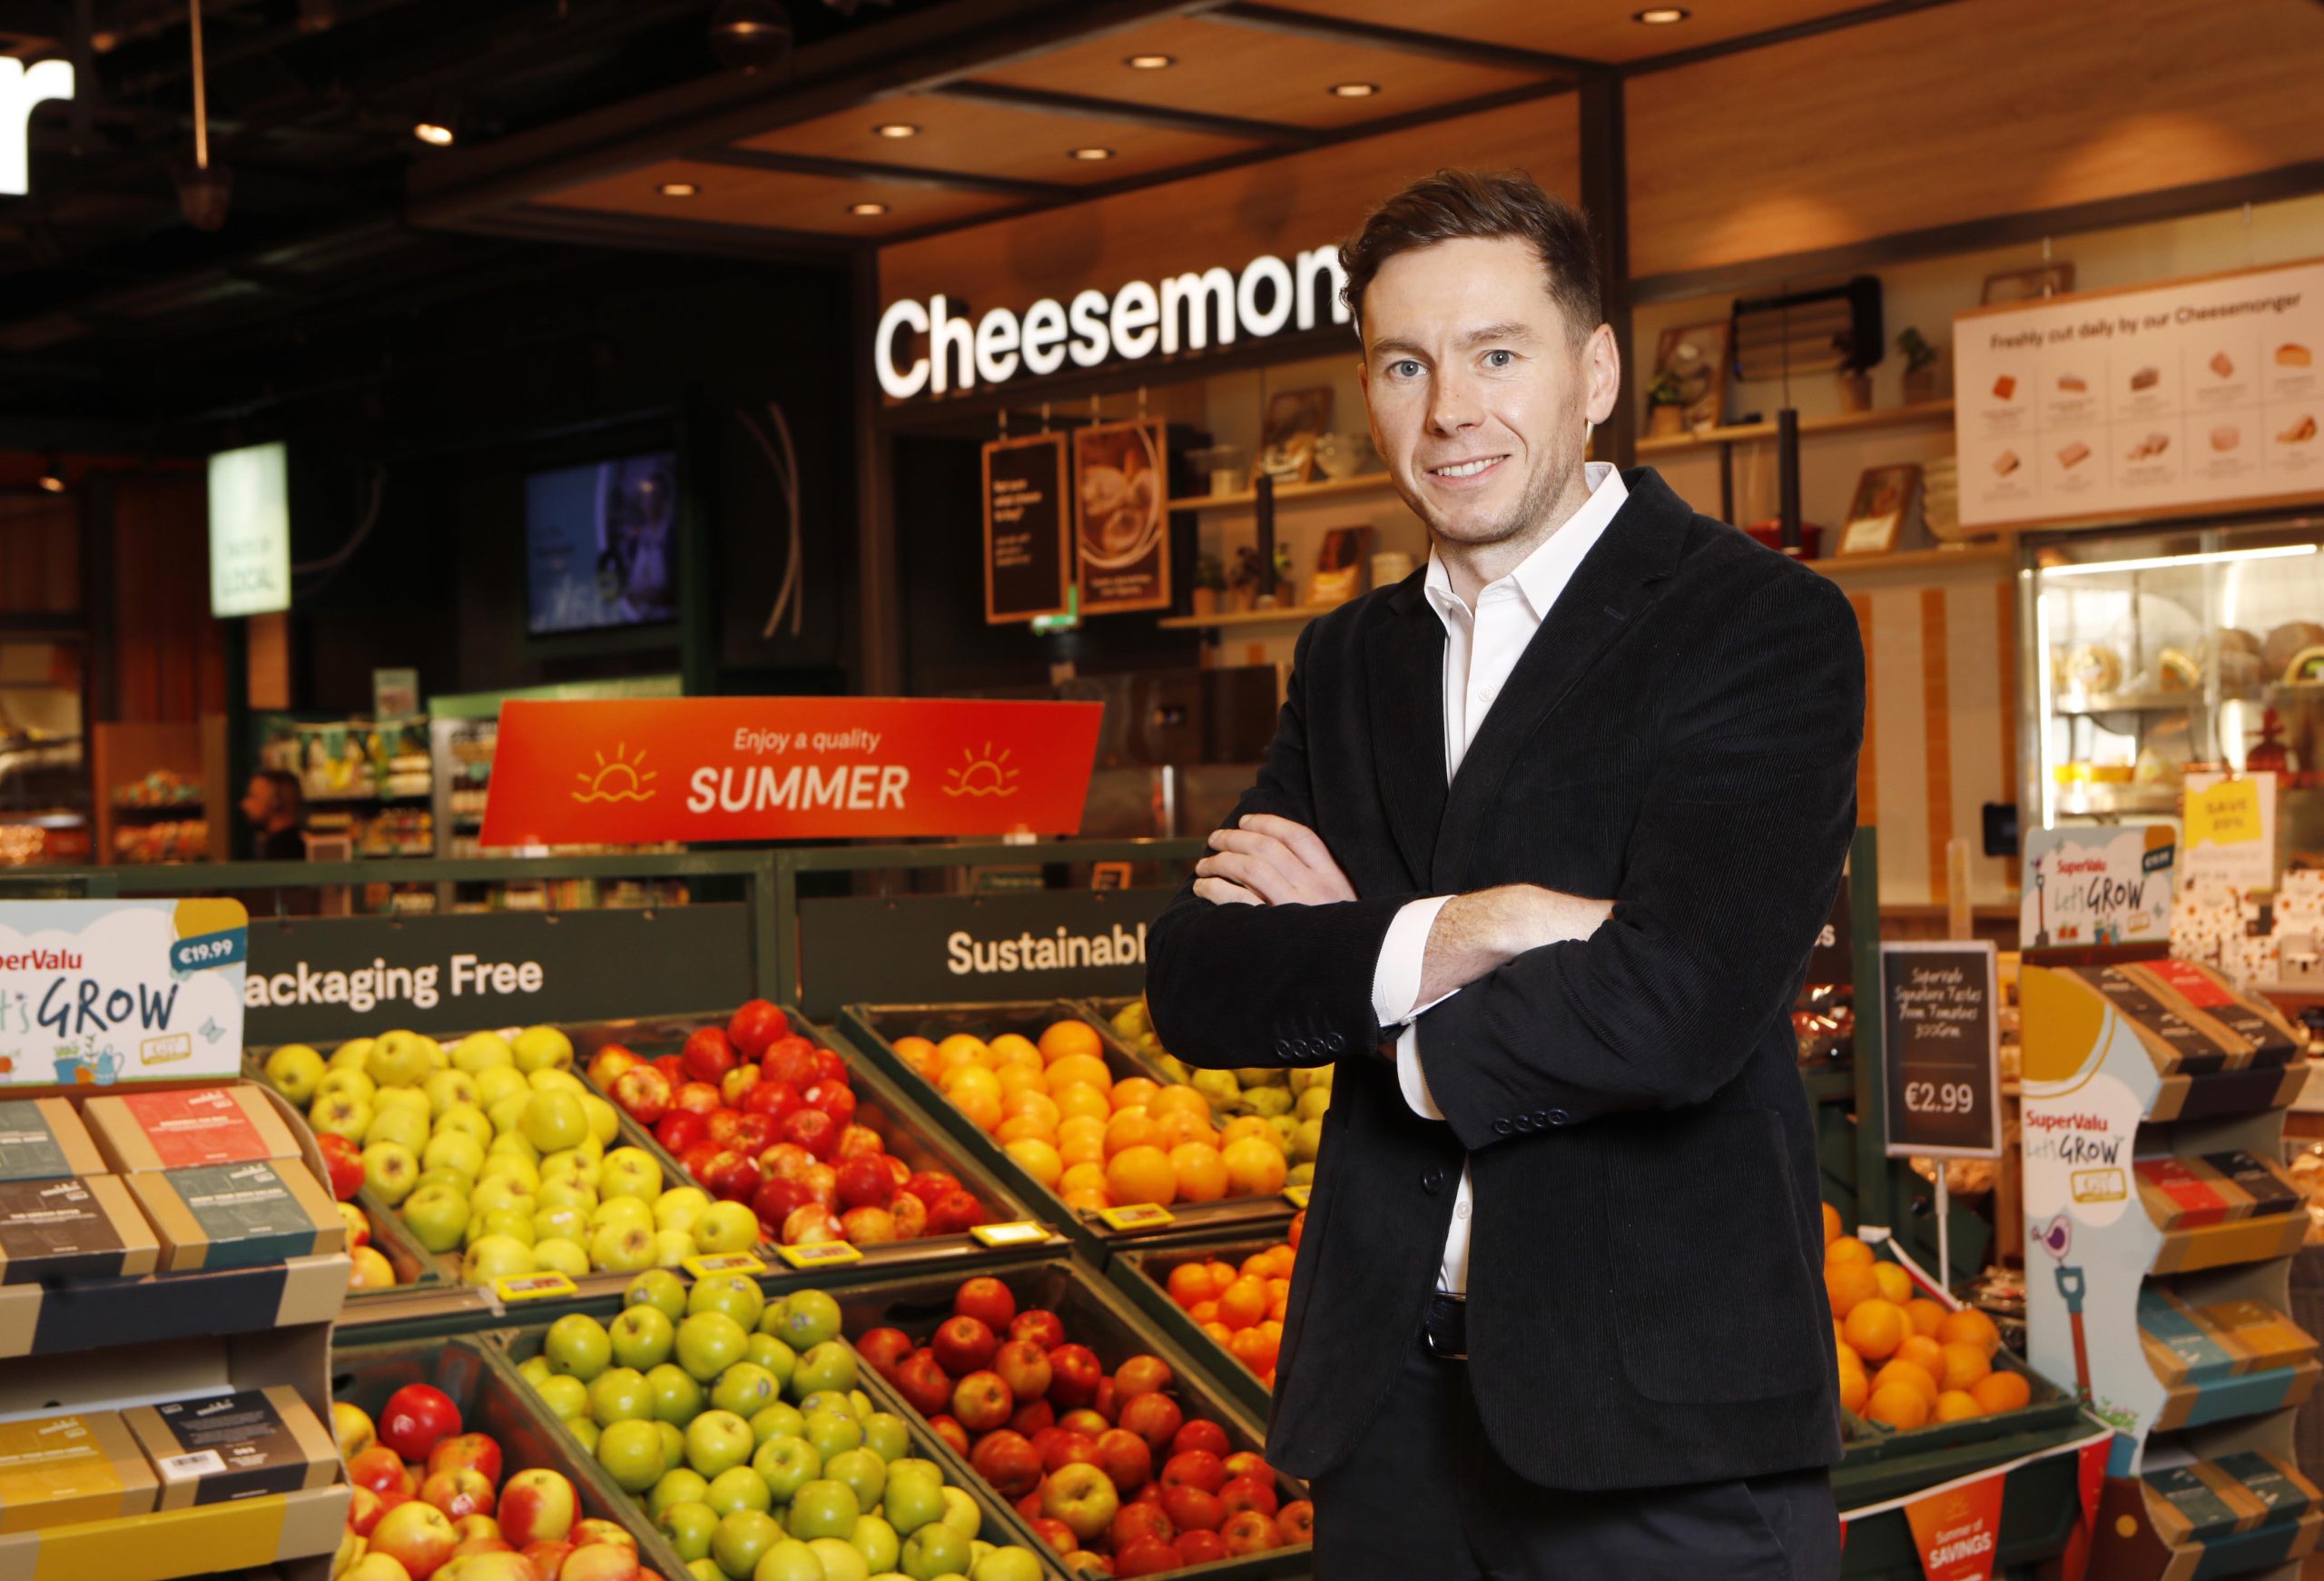 Dramatic findings from SuperValu research into food waste